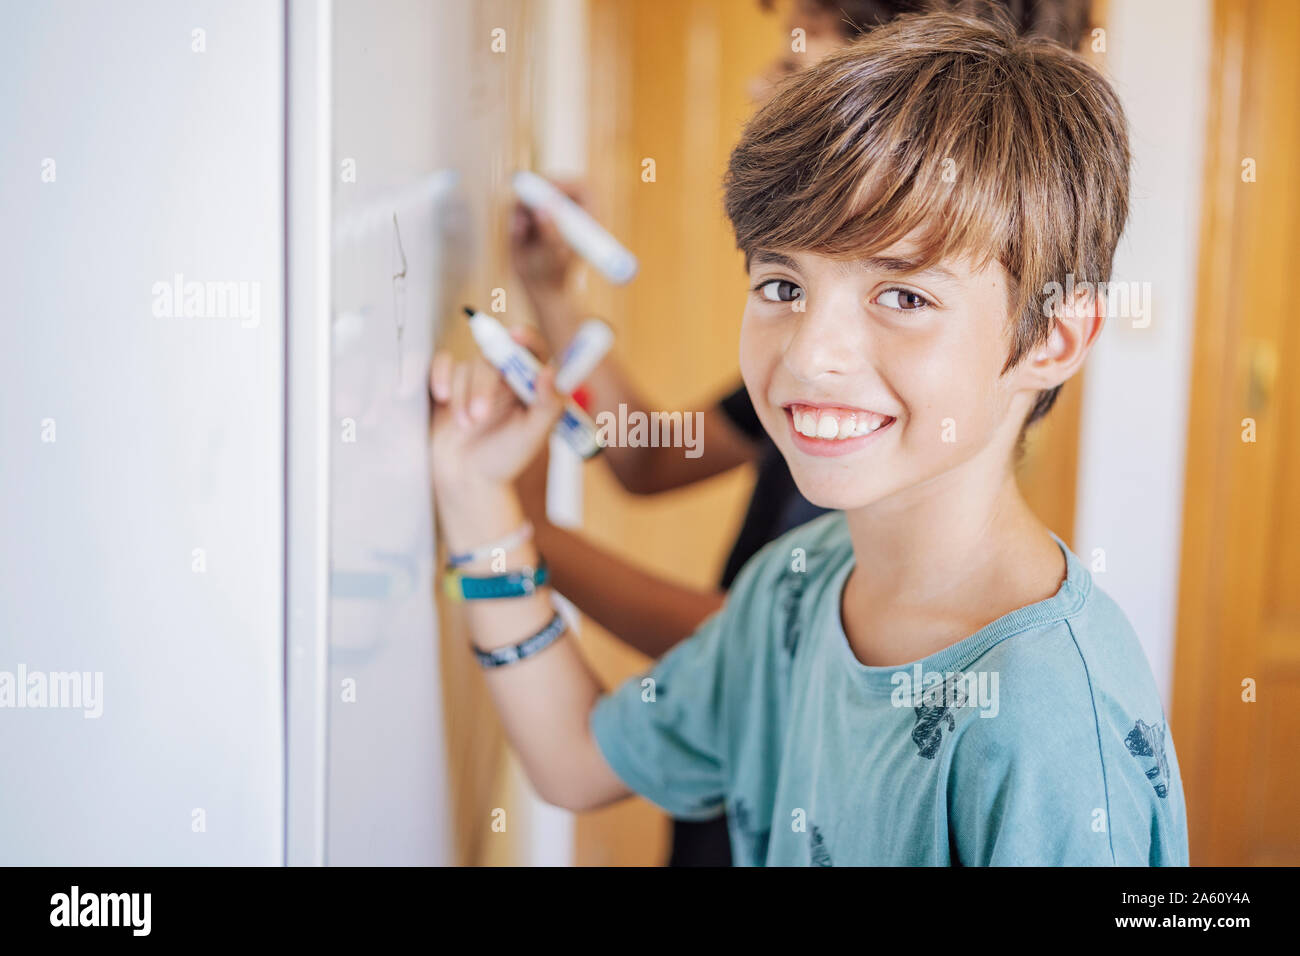 Portrait of smiling boy with a friend drawing on a whiteboard Stock Photo